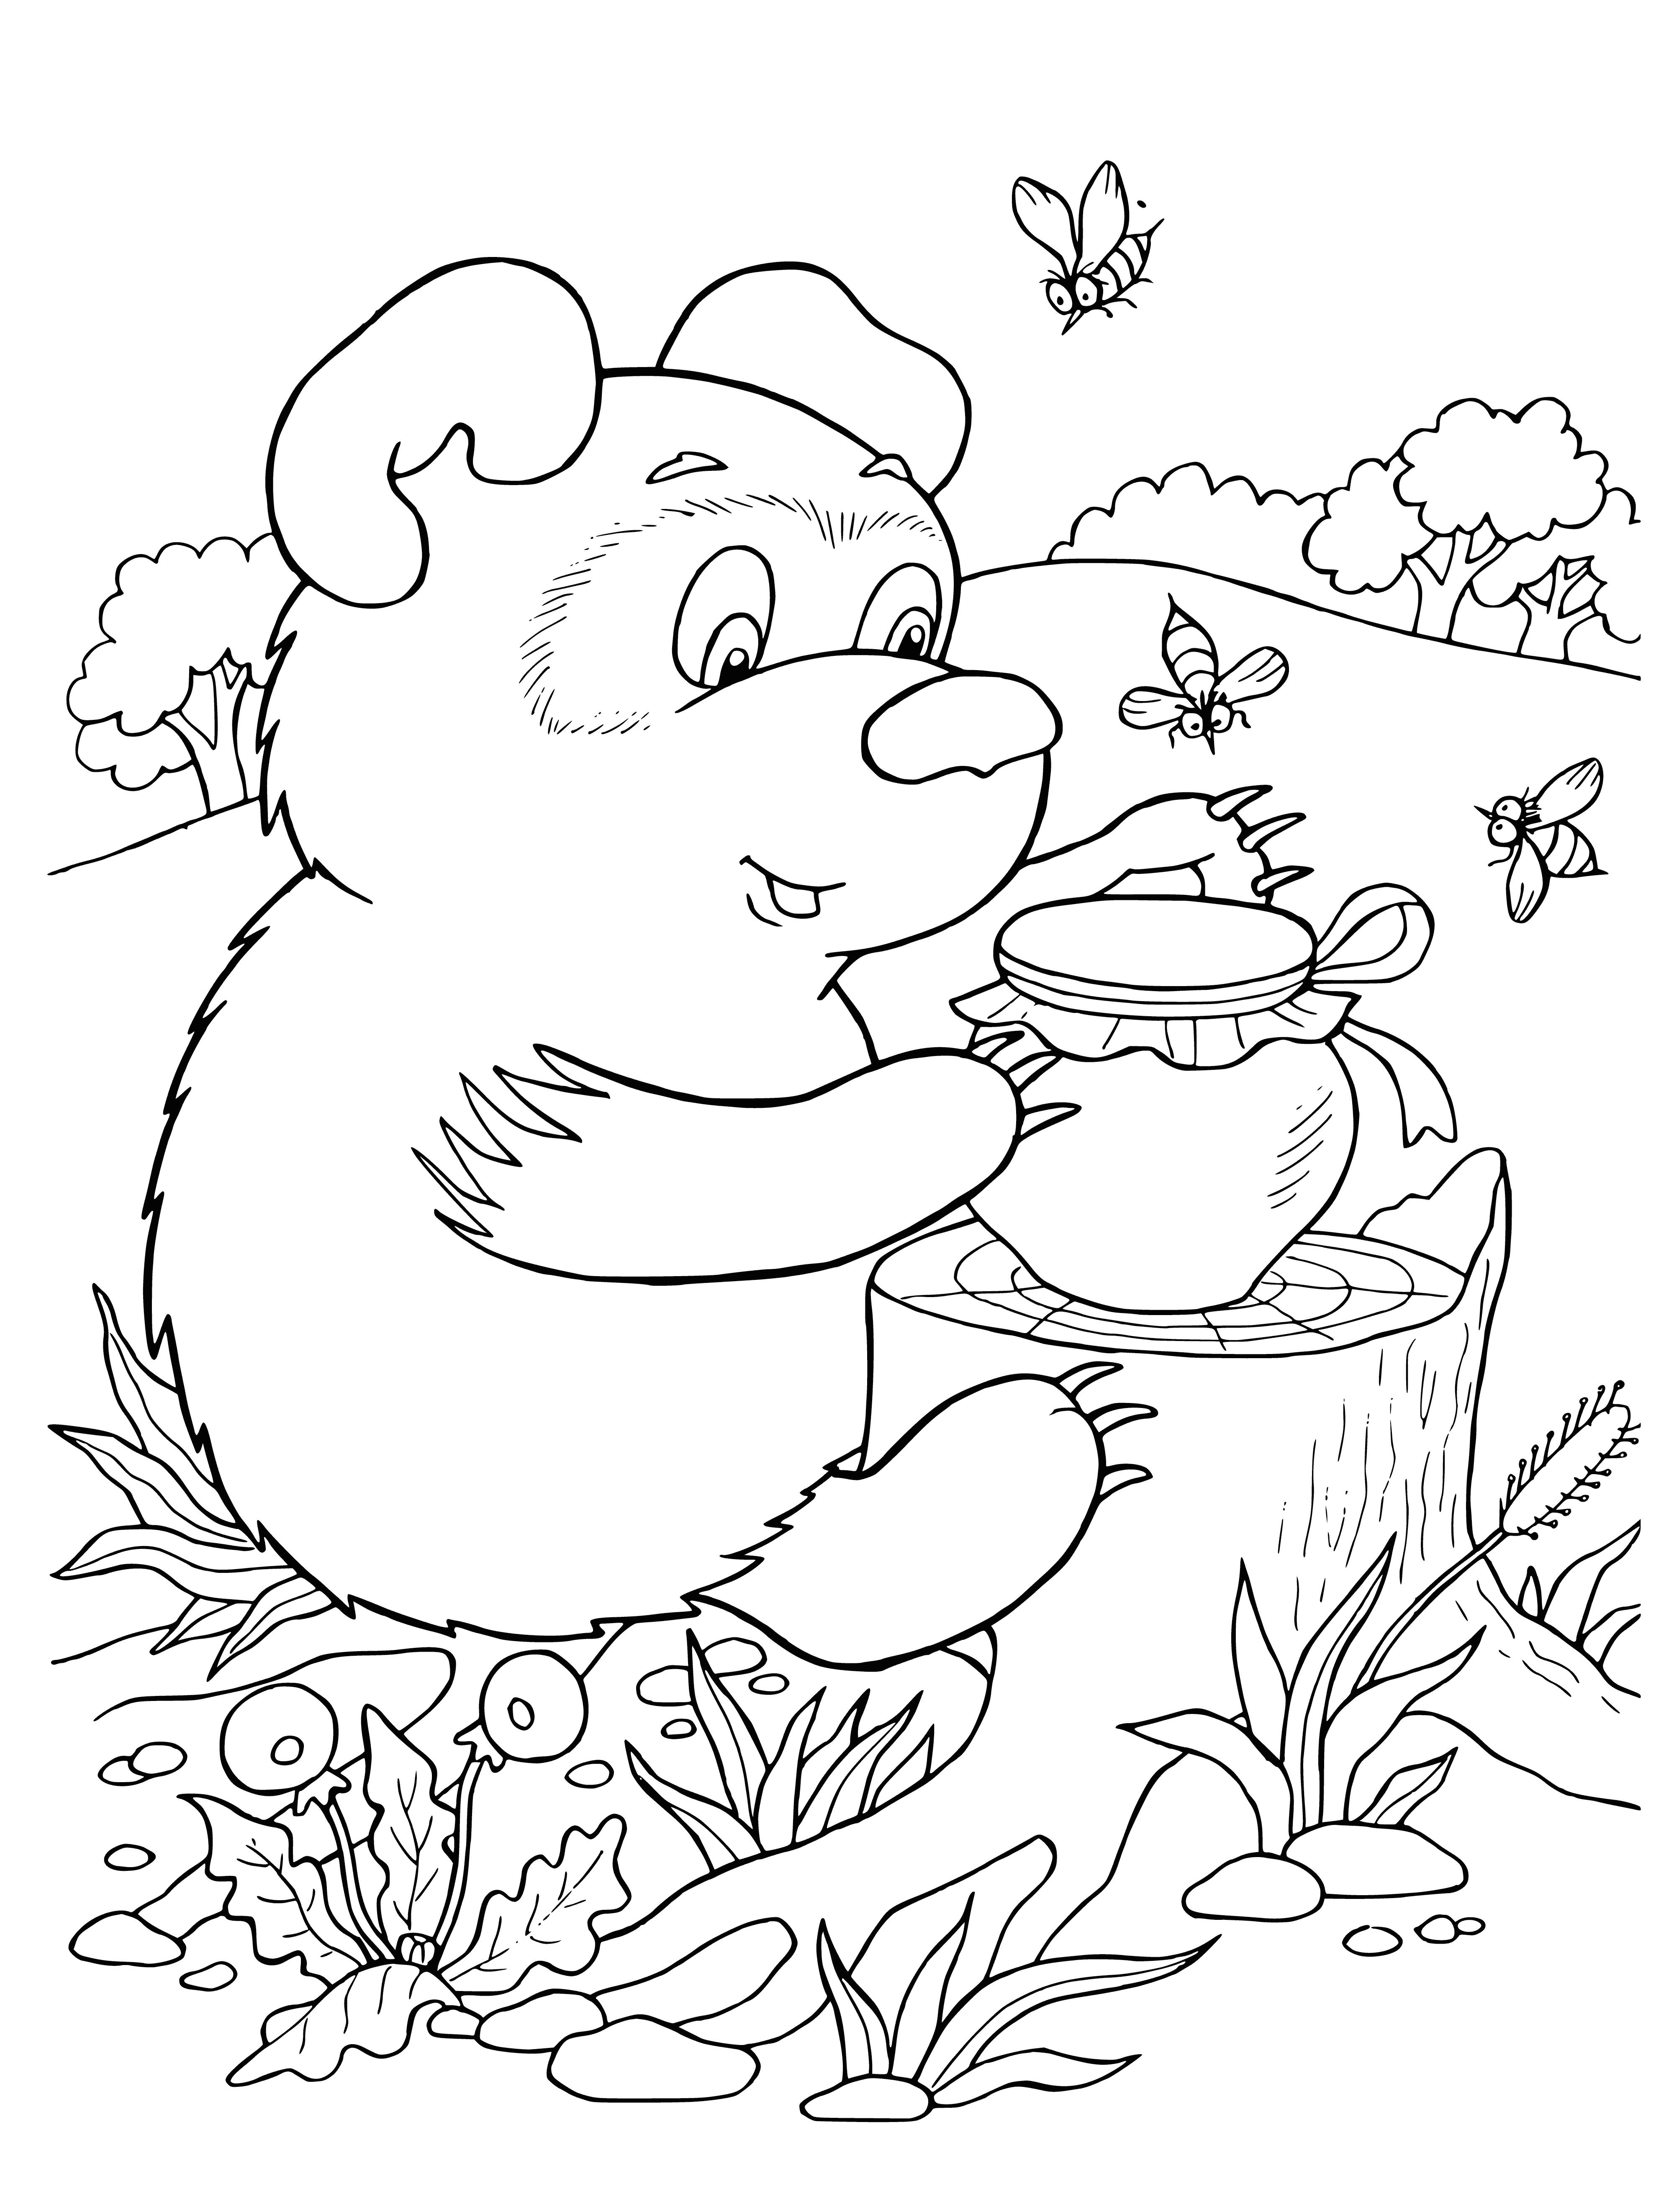 coloring page: Winnie the Pooh is a teddy bear with a red shirt and a honey pot. He's standing on a stool, gazing at the honey.